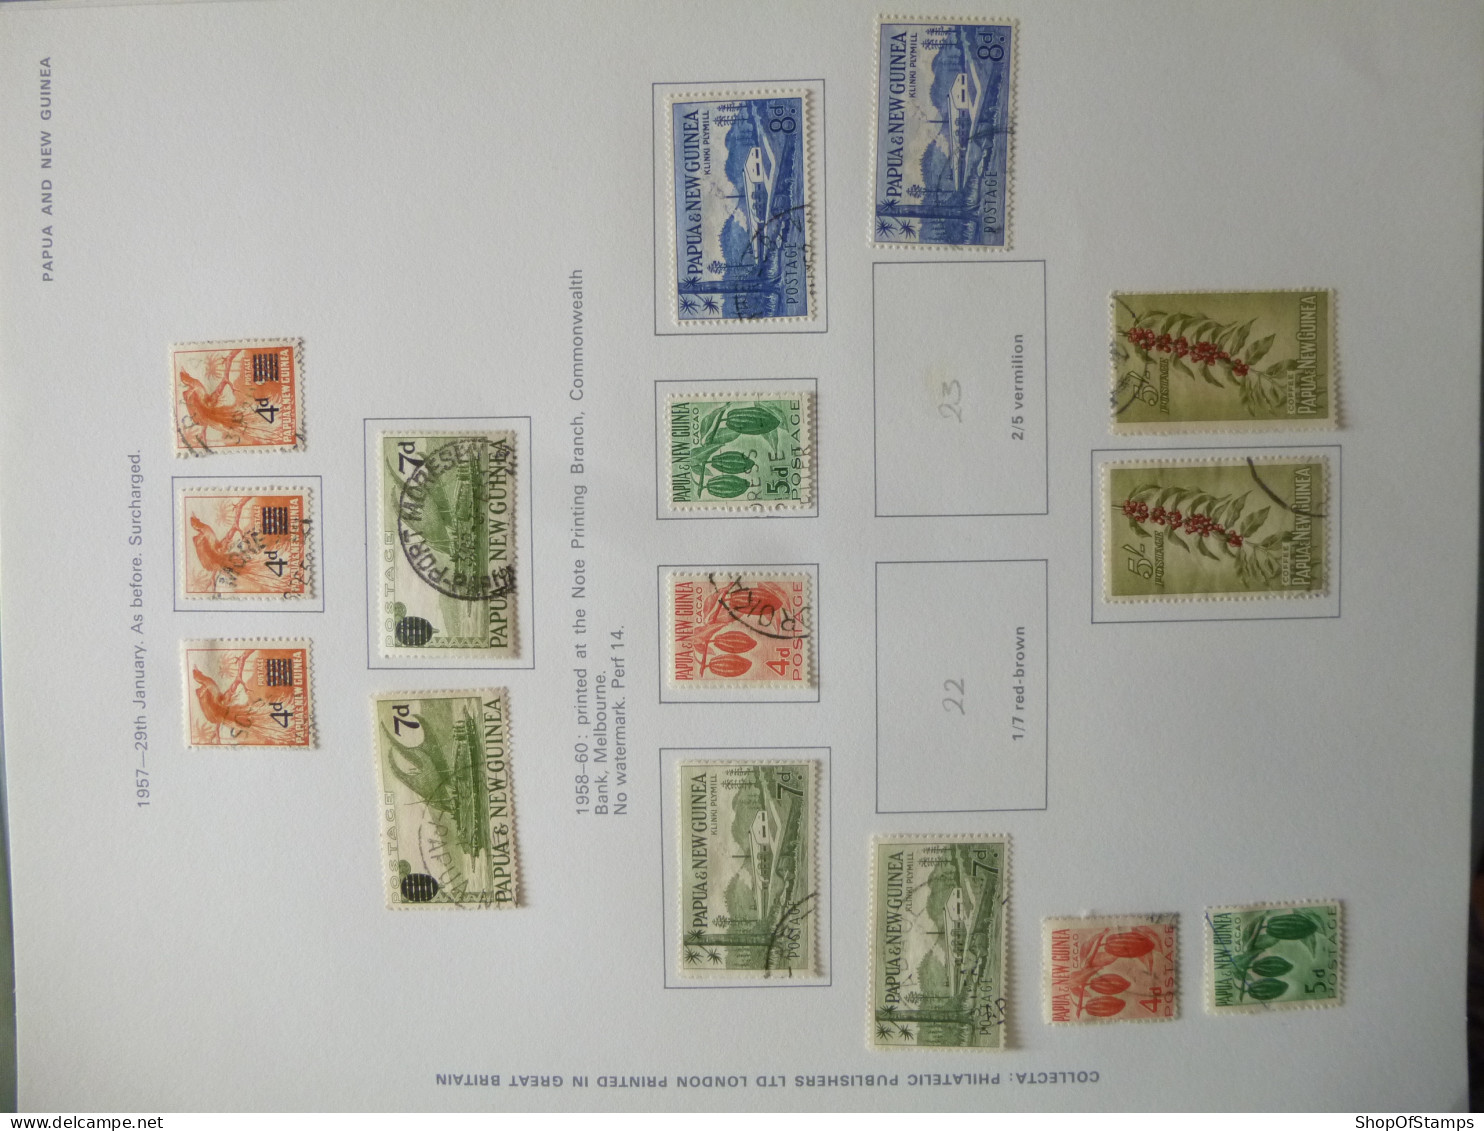 PAPUA NEW GUINEA SG 1/396 TOTAL 317 STAMPS [223 DIFFERENT 94 DUPLICATE] - Papouasie-Nouvelle-Guinée